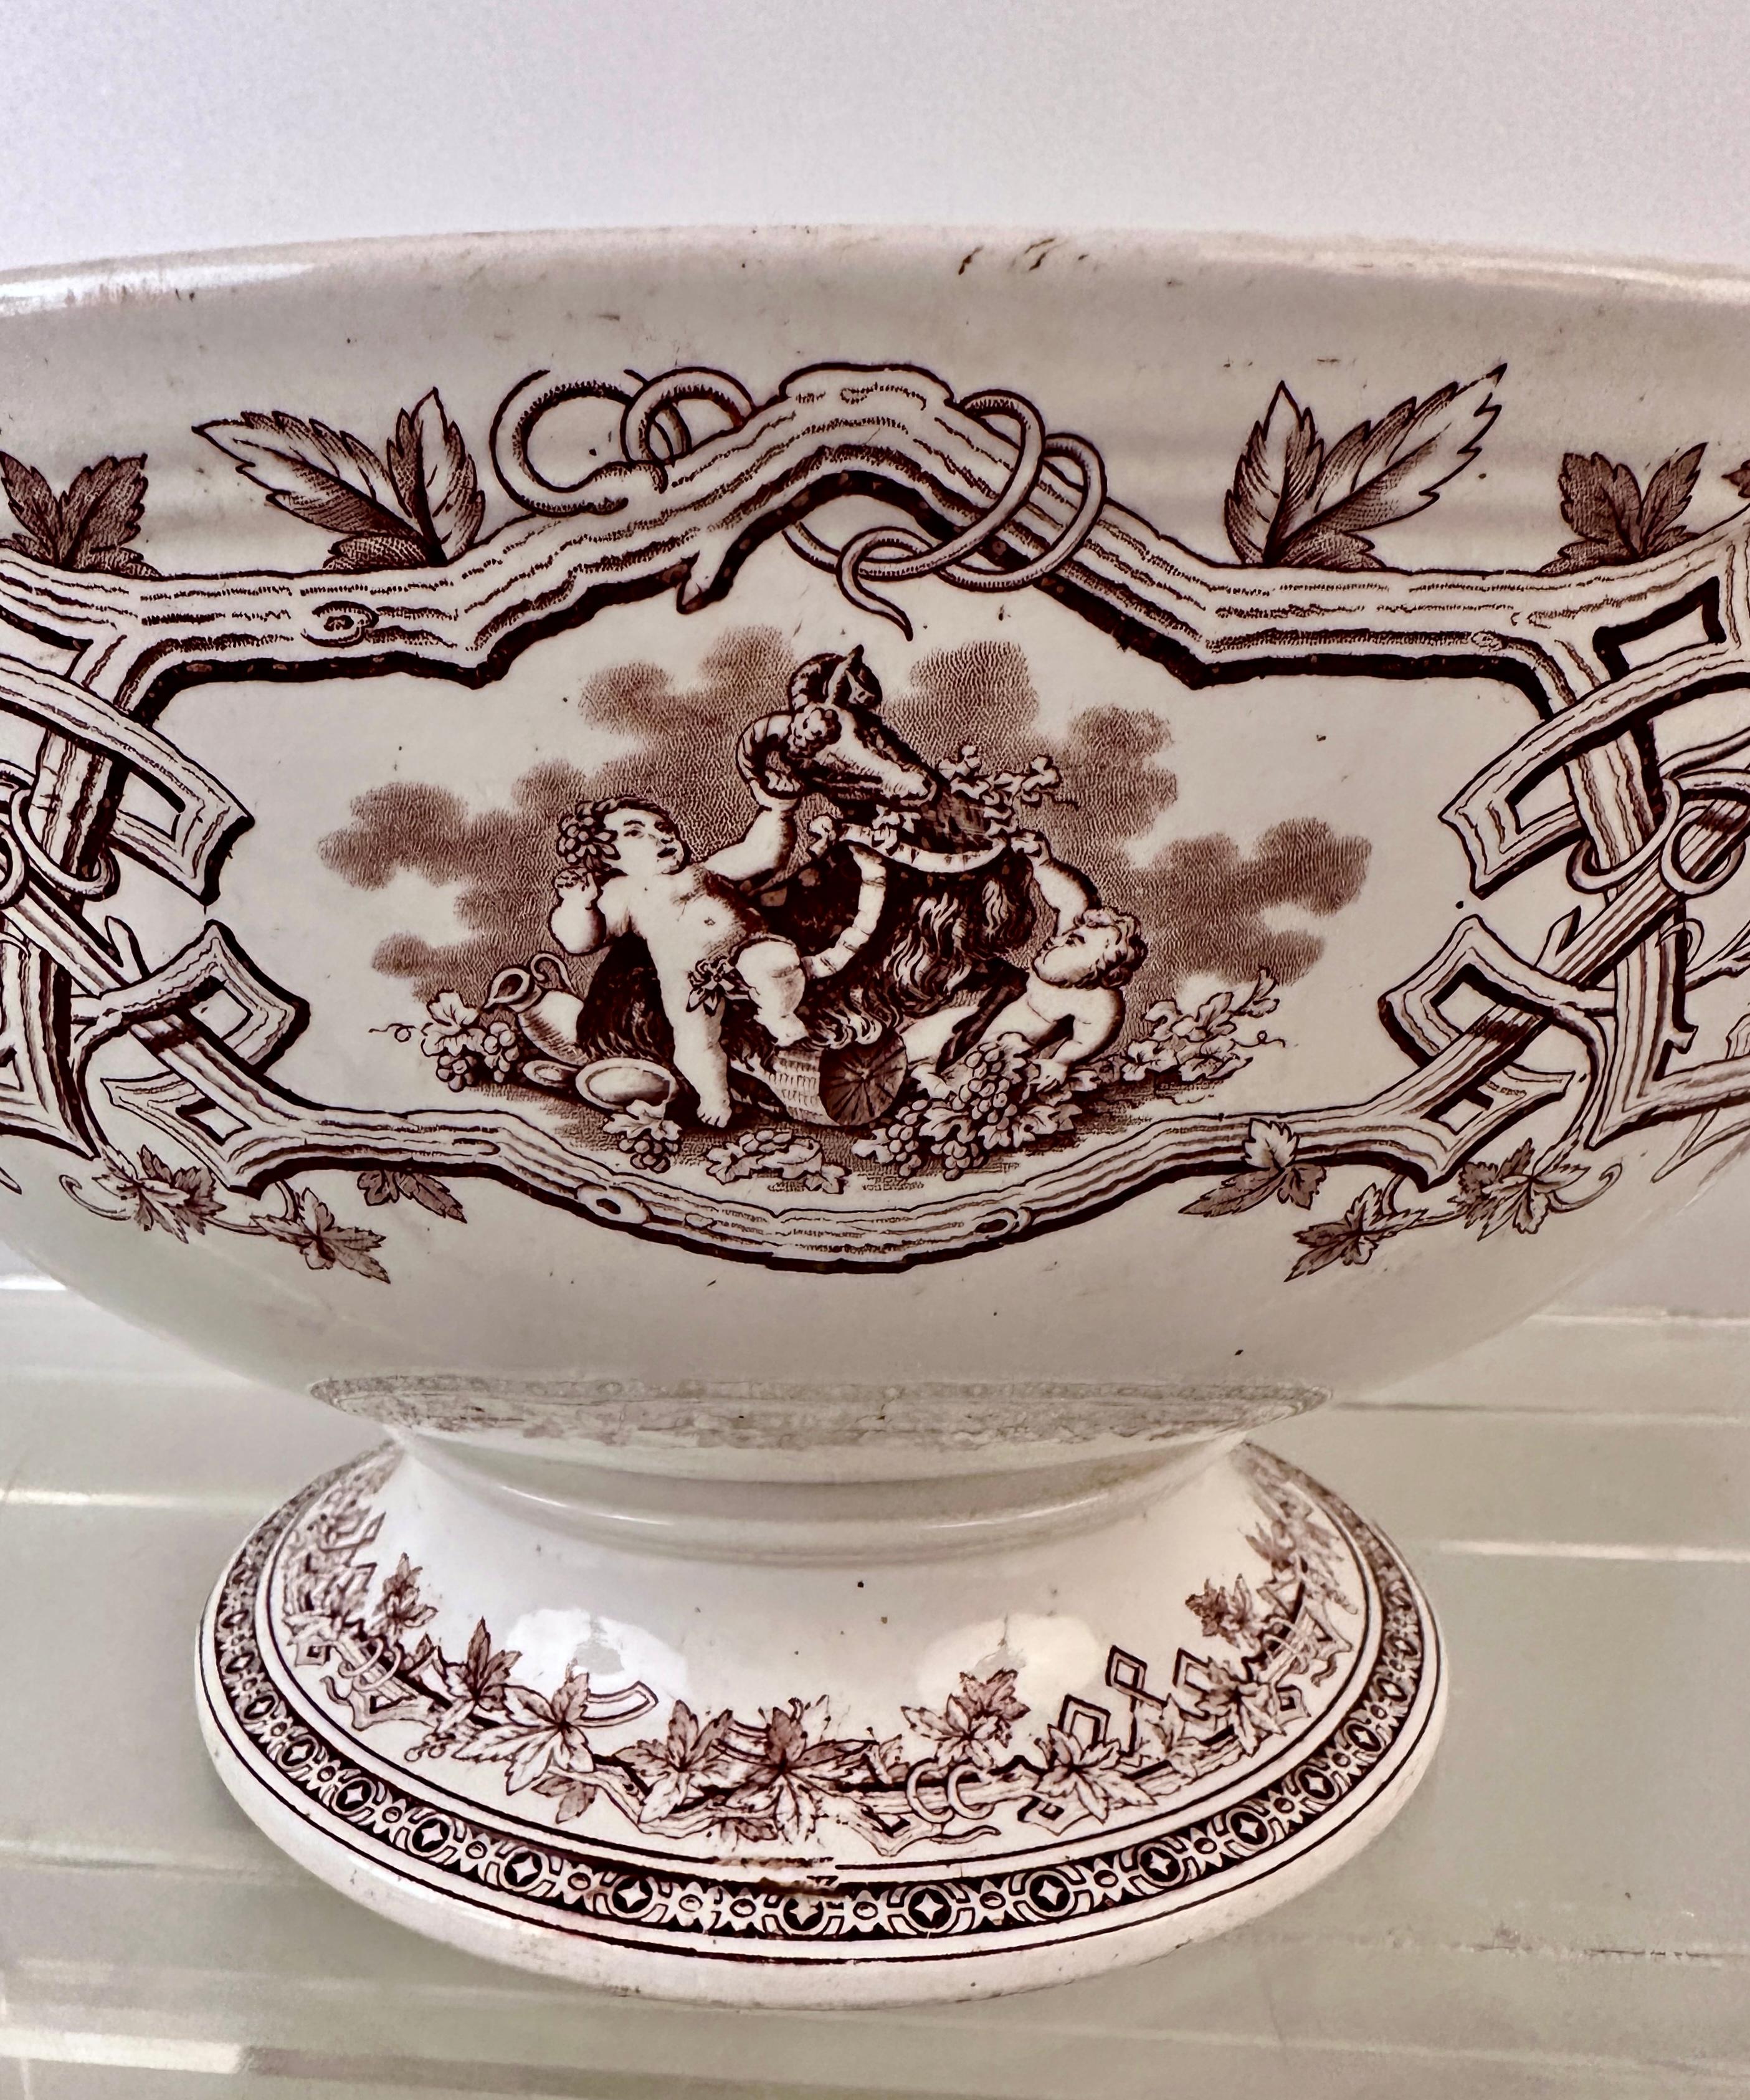 !9th C English Transferware Punch Bowl by Furnival For Sale 2